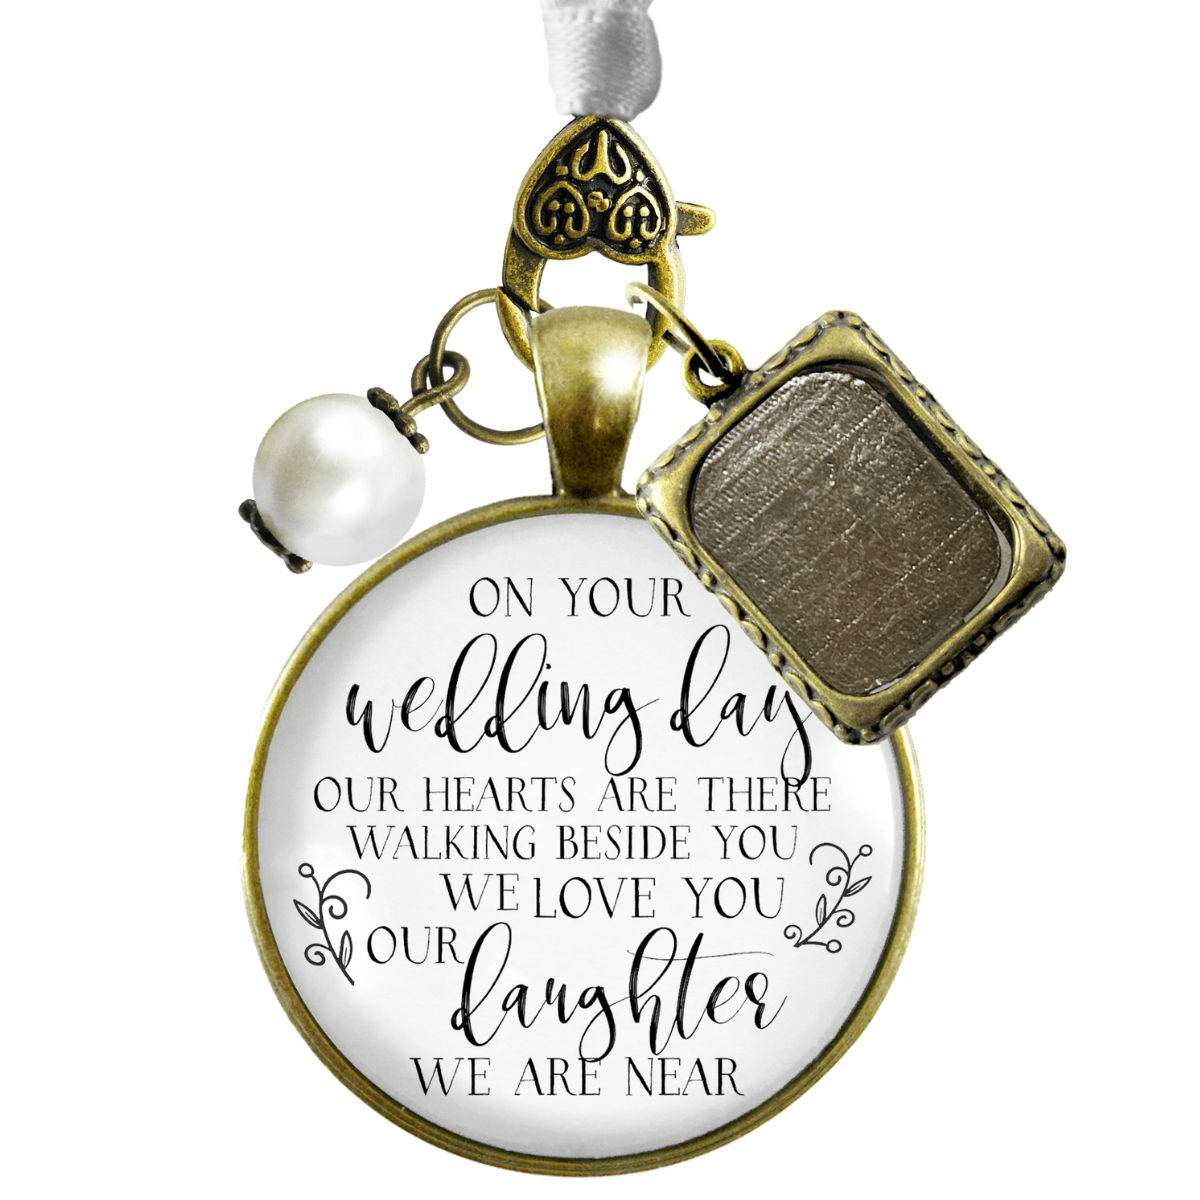 On Your Wedding Day OUR Heart Is There Walking Beside You DAUGHTER - BRONZE - WHITE - WHITE BEAD